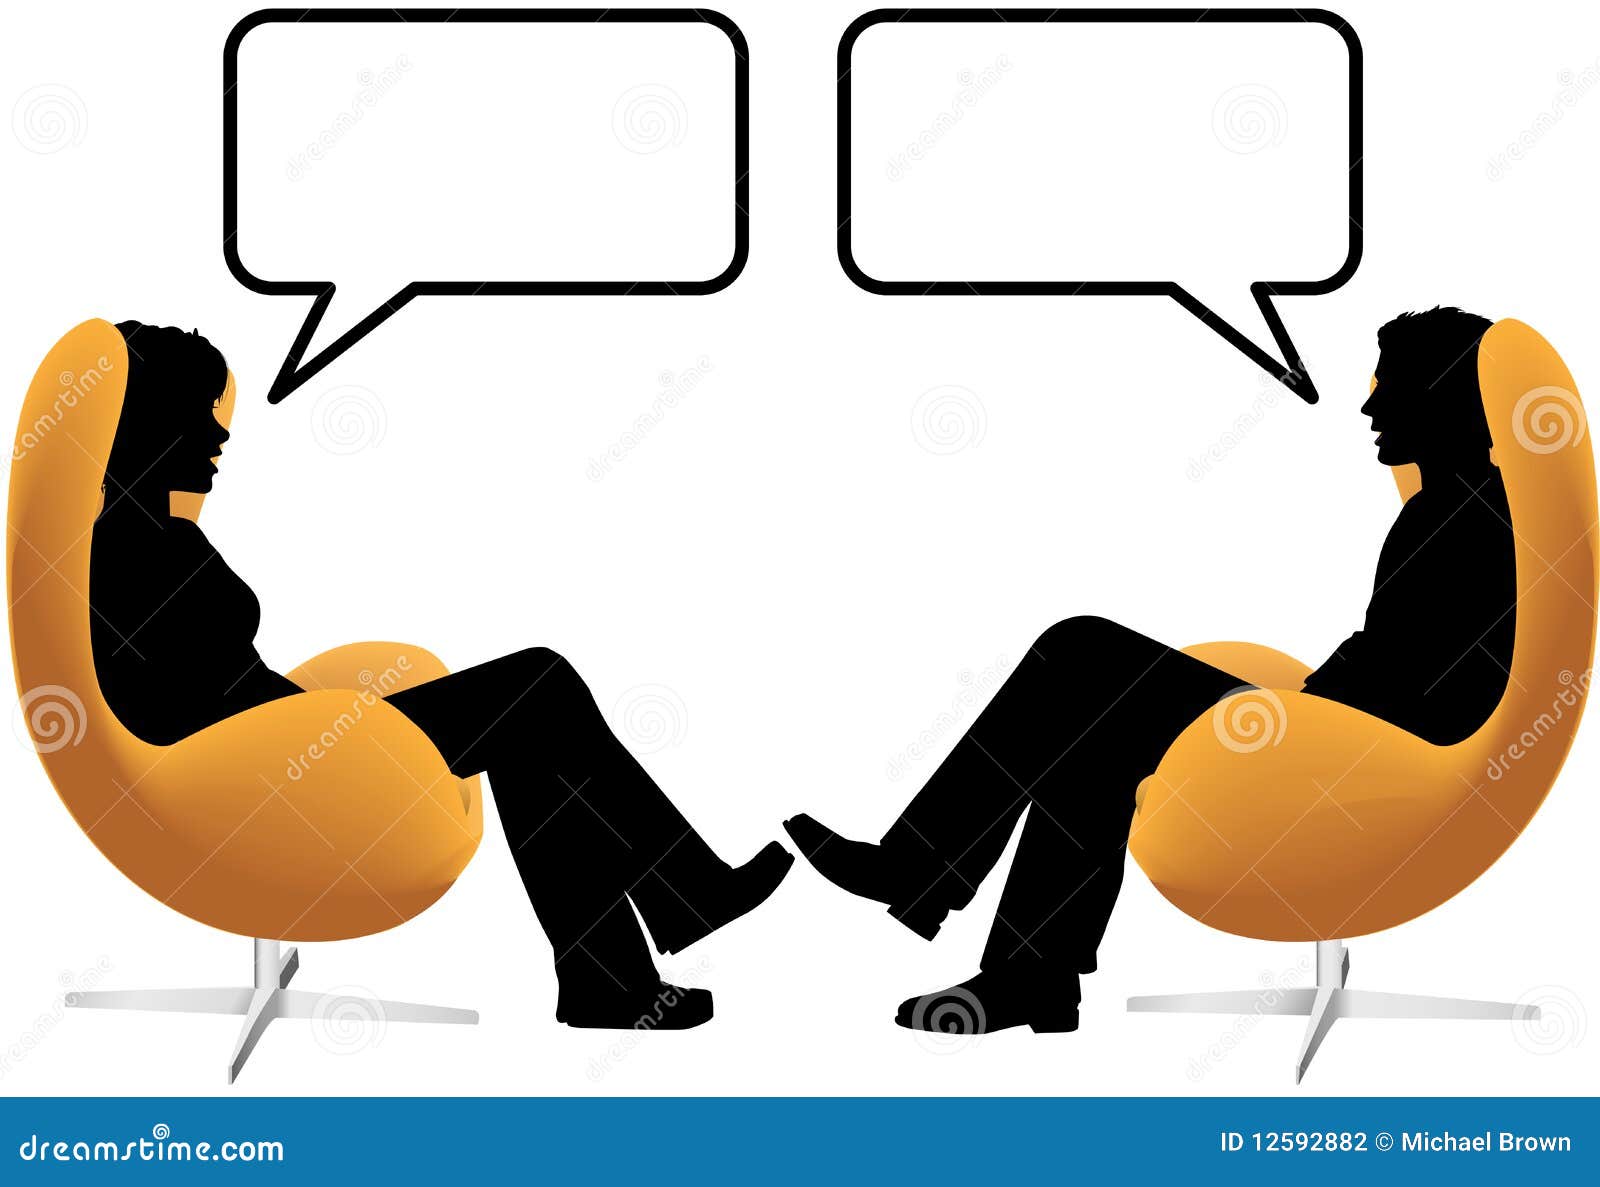 man woman couple sit talk in egg chairs